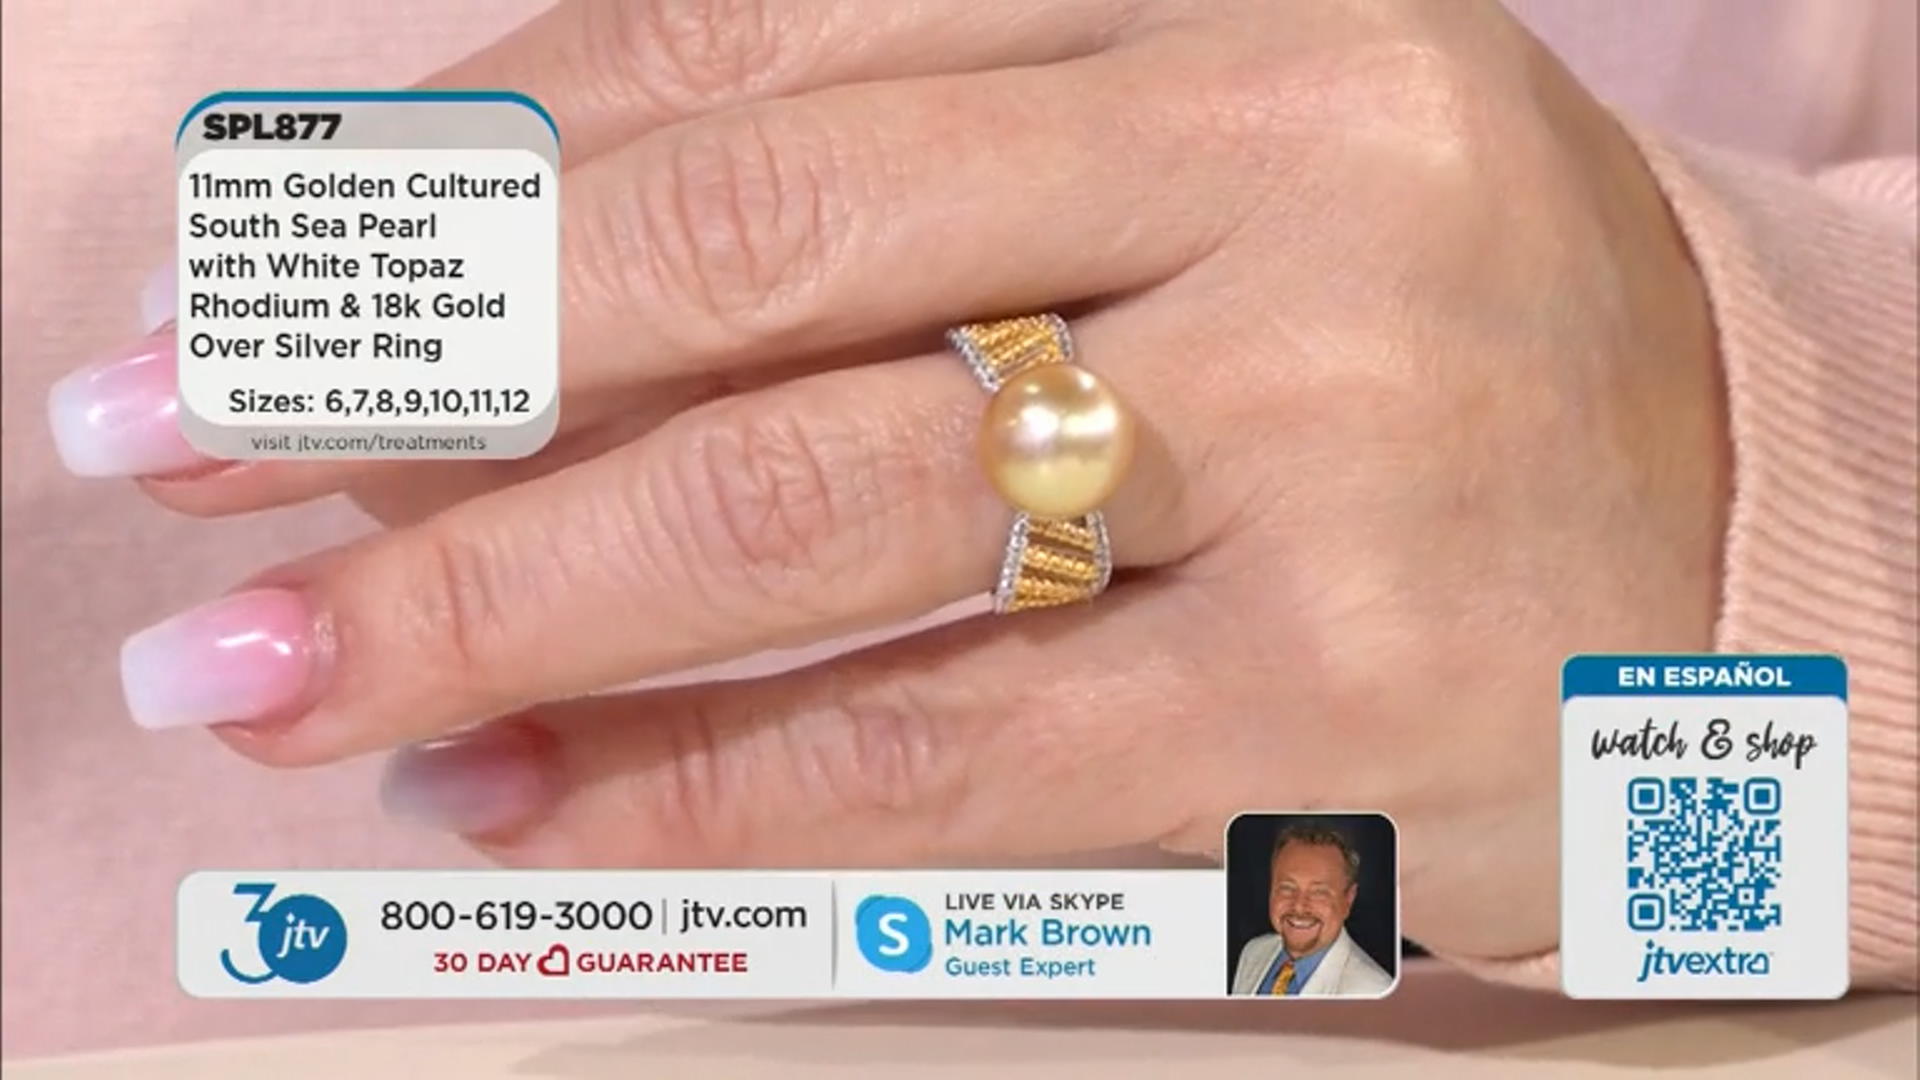 Golden Cultured South Sea Pearl & White Topaz Rhodium and 18k Yellow Gold Over Silver Ring Video Thumbnail